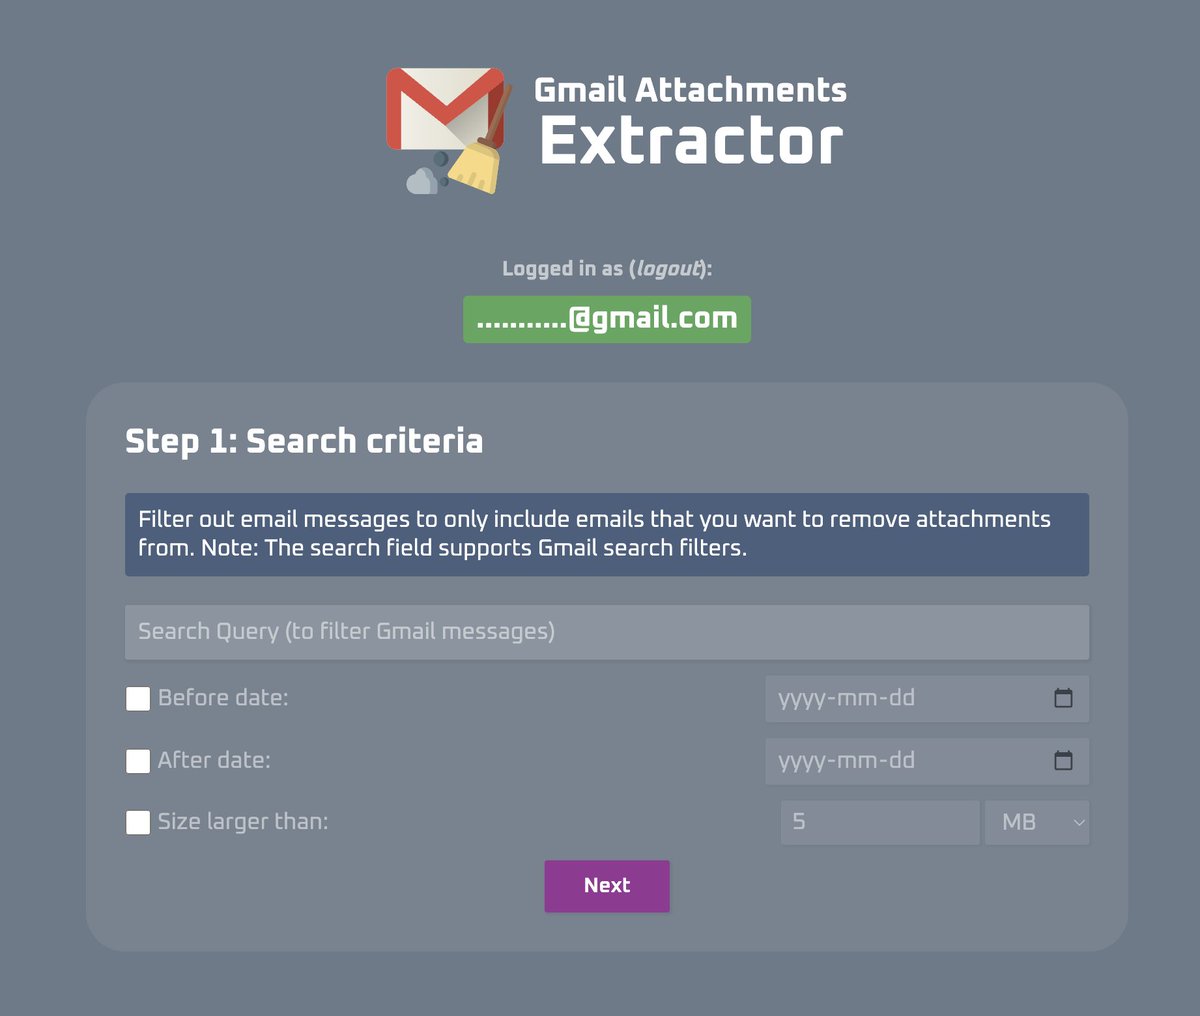 Currently working on a web-app for extracting (downloading) Gmail attachments & then removing them from emails to free up some space in Google Storage. #buildinpublic  #freelancer #solofounder